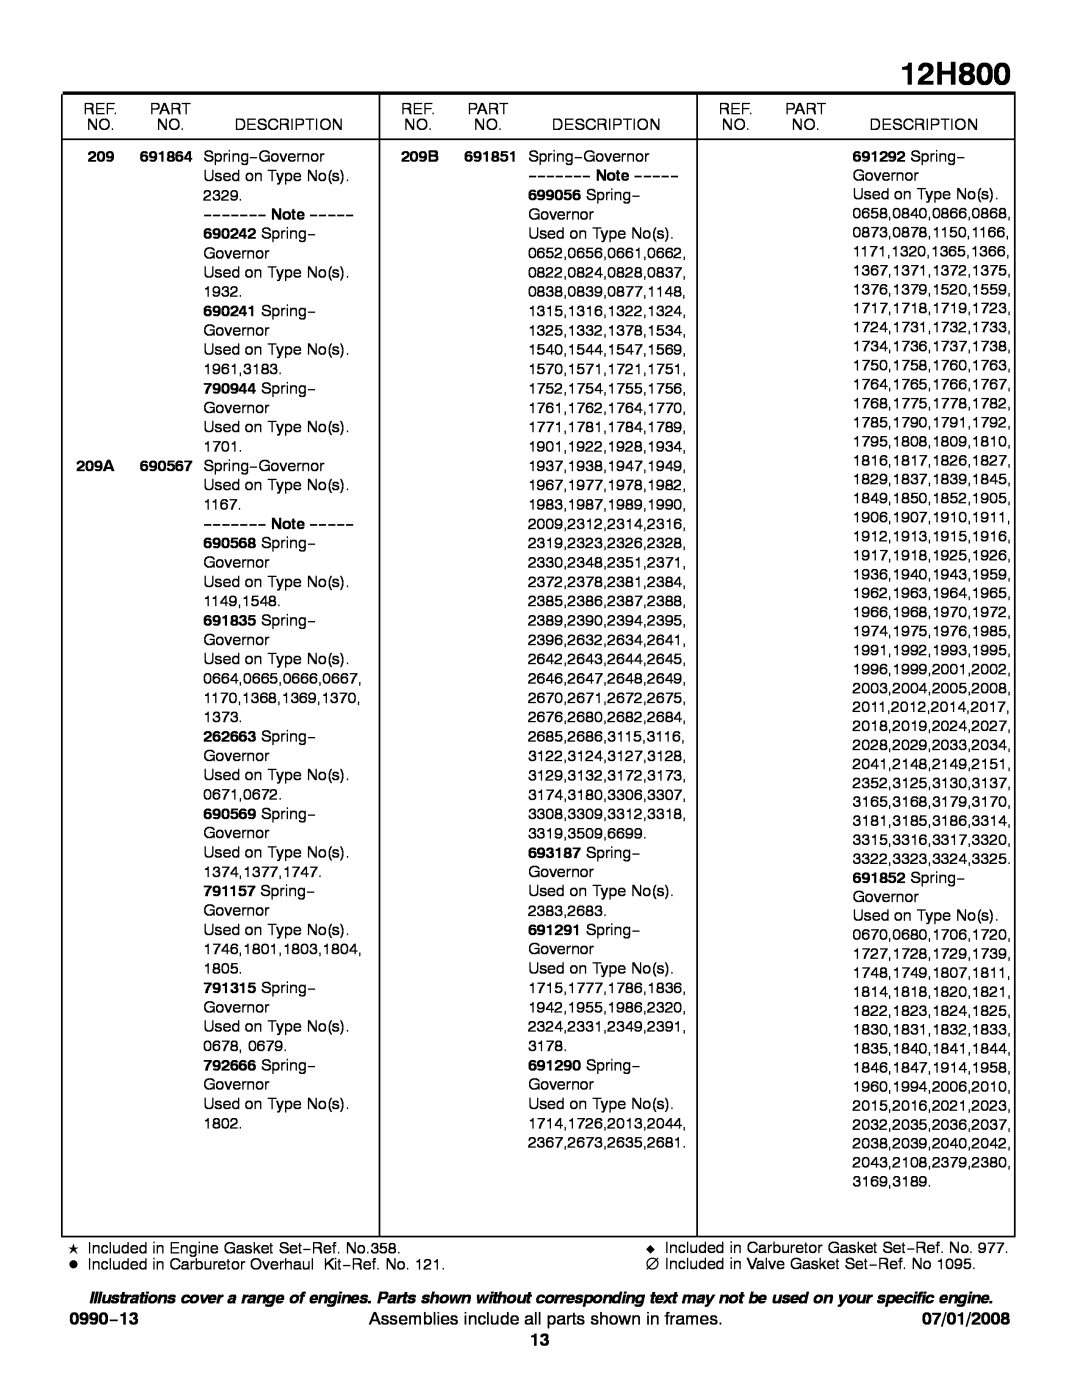 Briggs & Stratton 12H800 service manual 0990−13, Assemblies include all parts shown in frames, 07/01/2008 